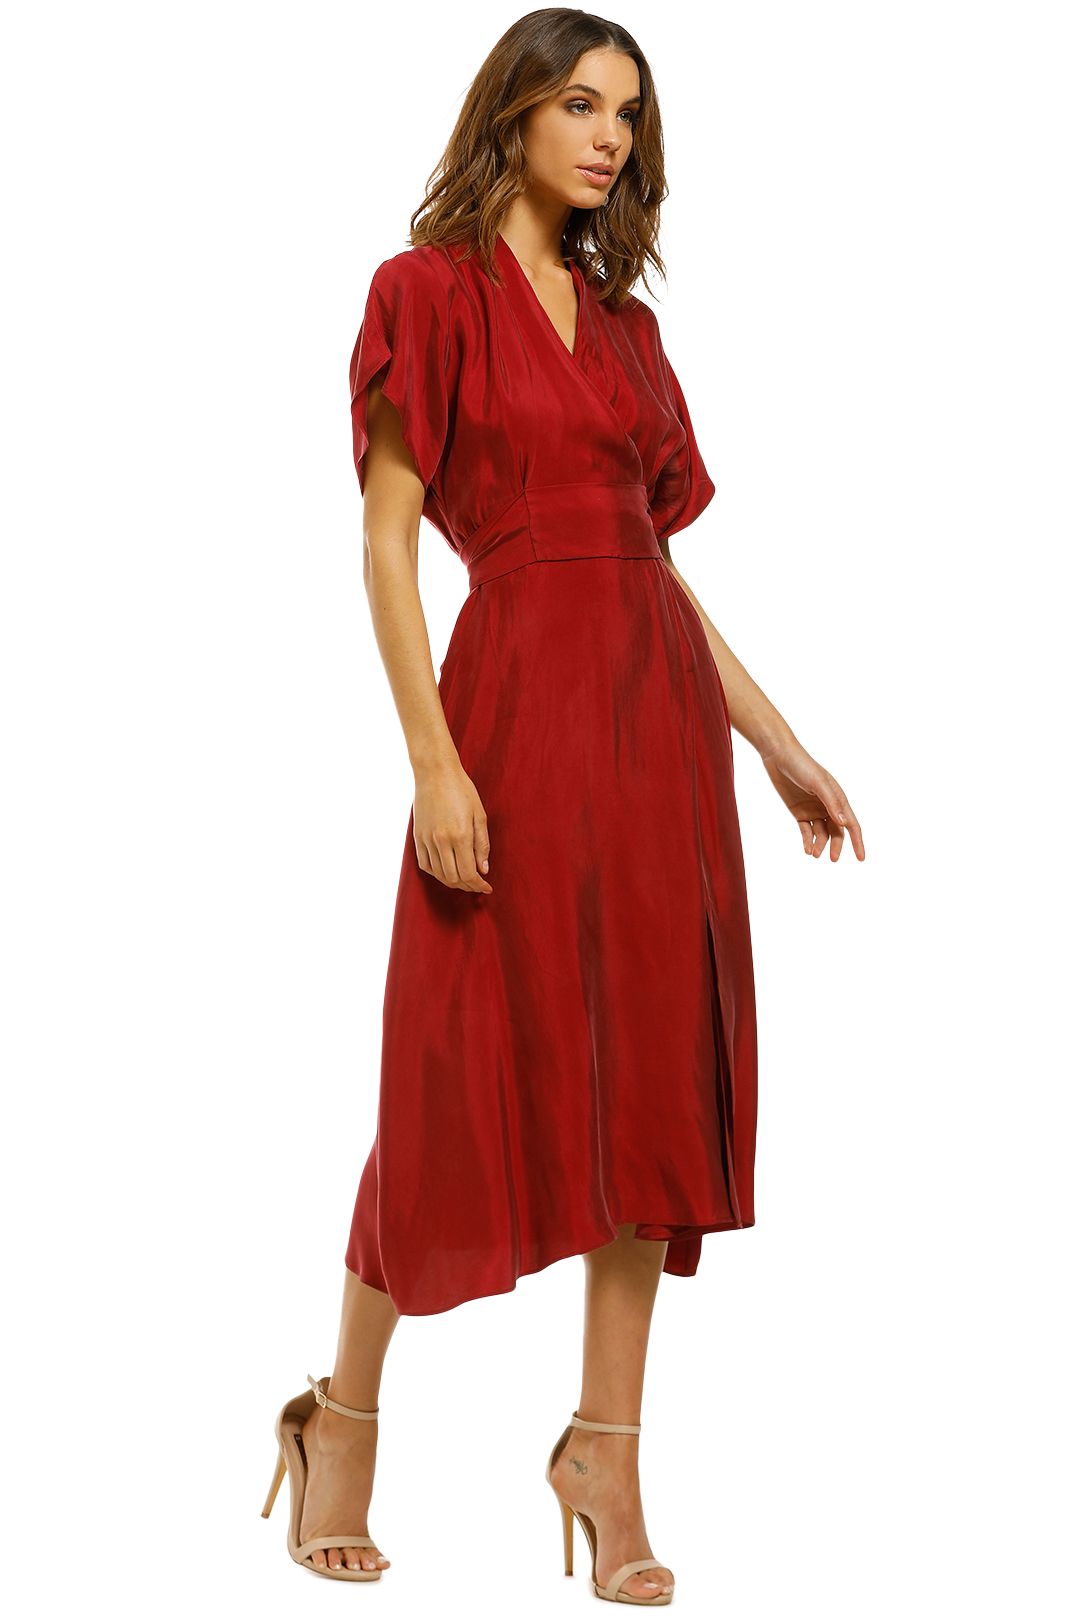 Ginger-and-Smart-Shade-Dress-Ruby-Side